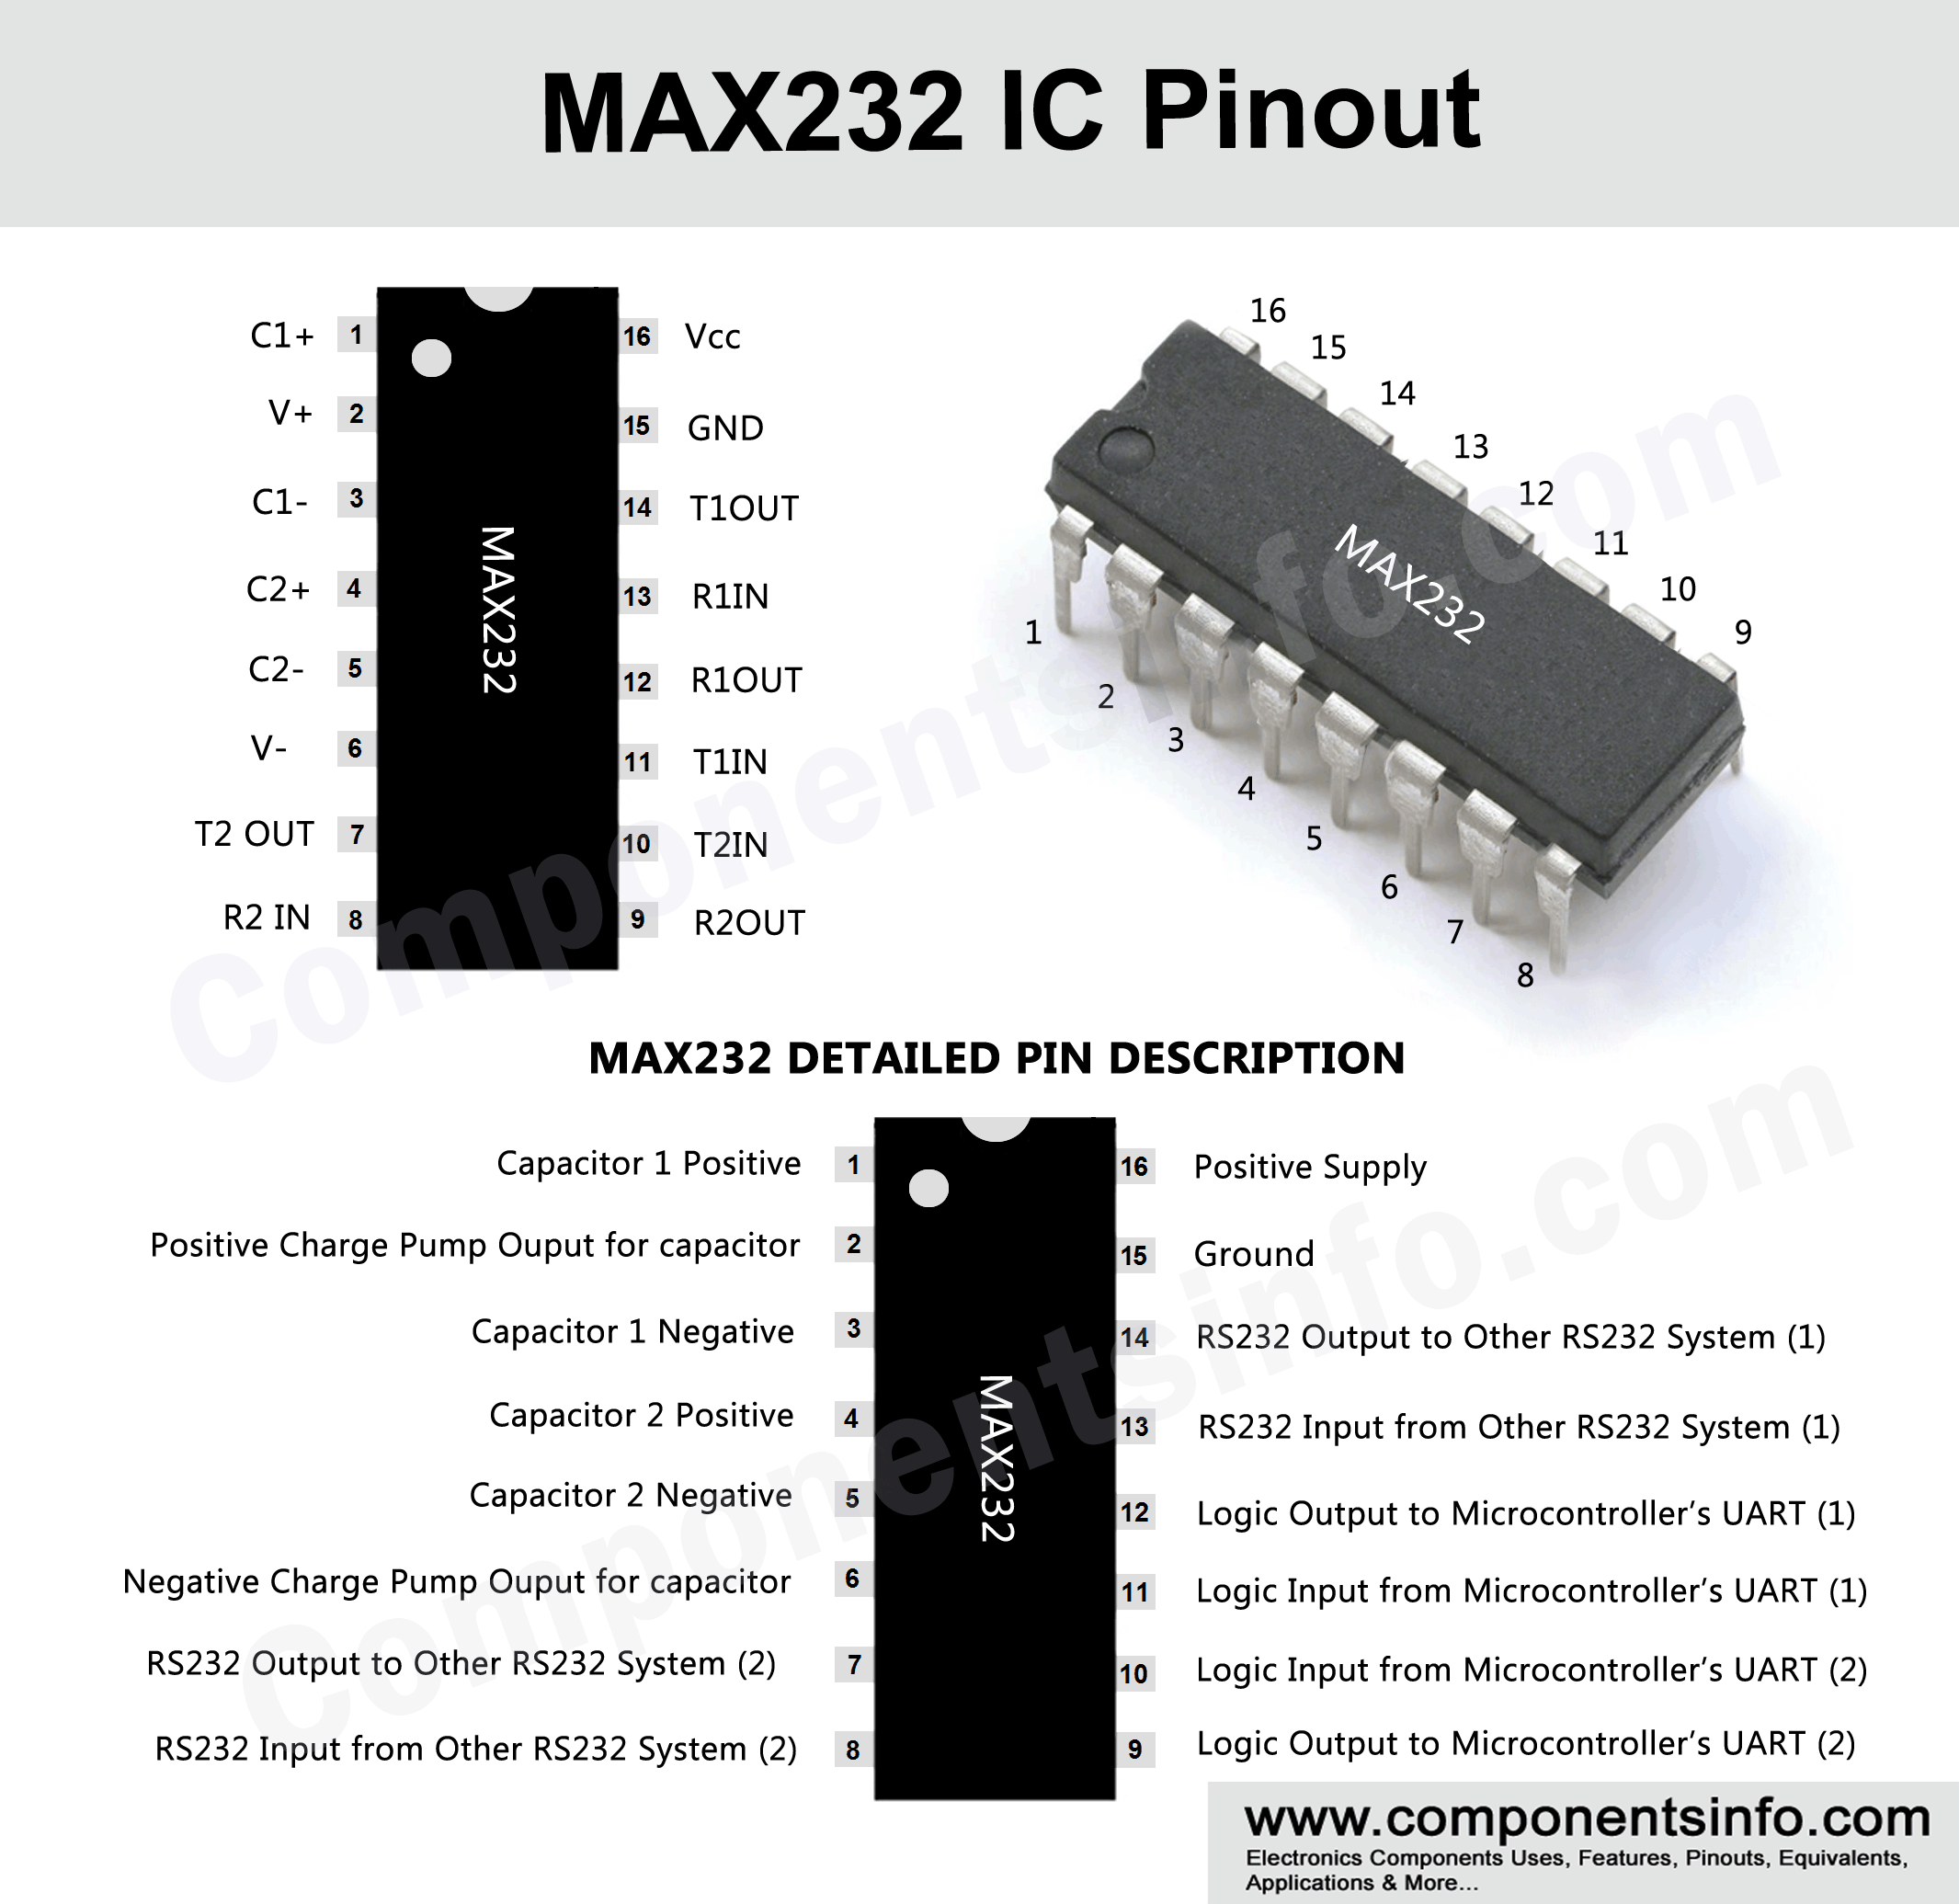 MAX232 Pinout, Applications, Uses, Features and Other Details